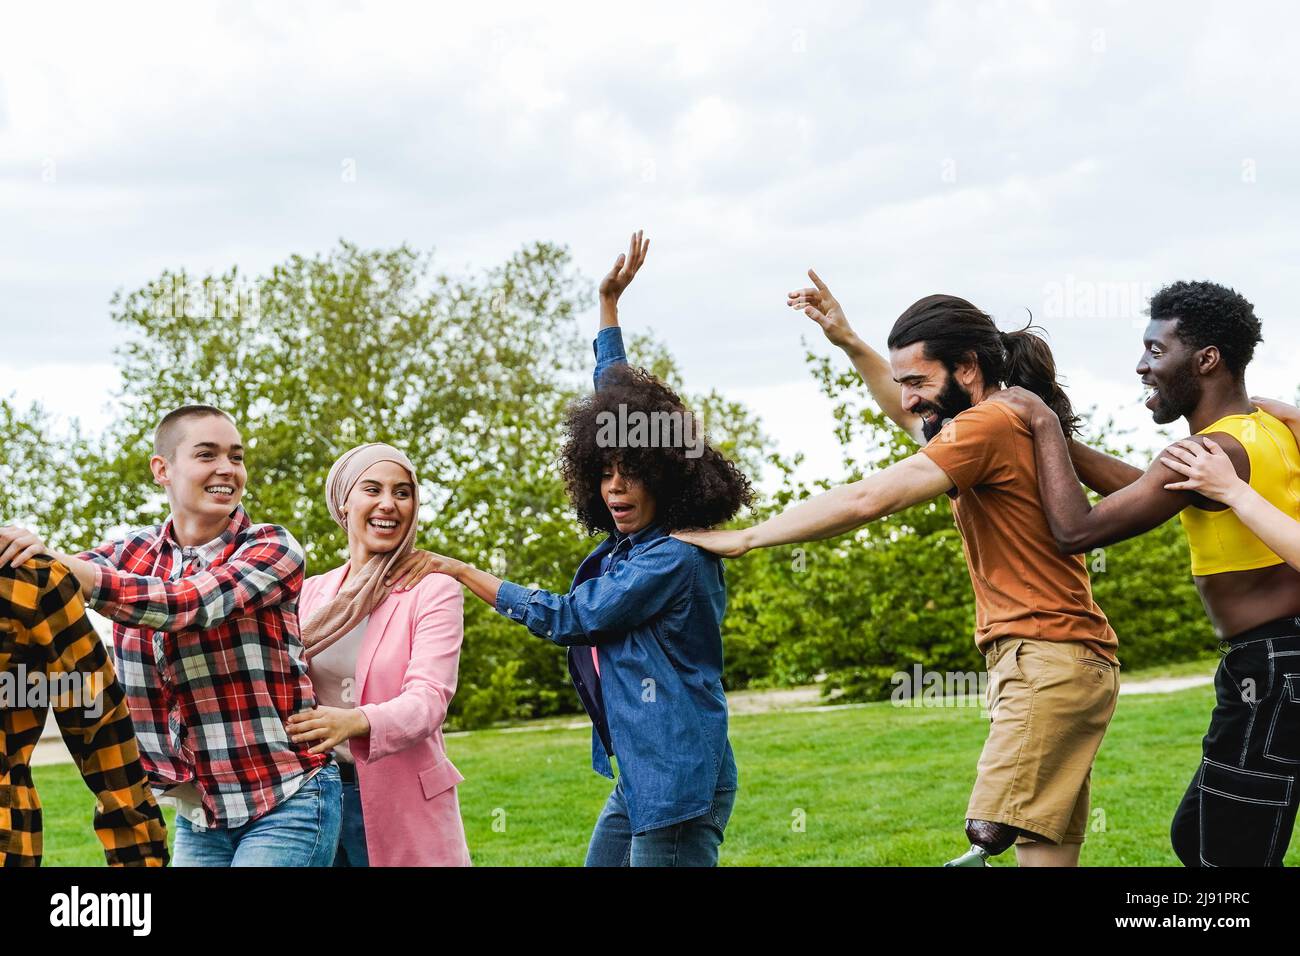 Multiethnic group of diverse friends having fun dancing together outdoor during summer vacations - Focus on man with leg prosthesis Stock Photo